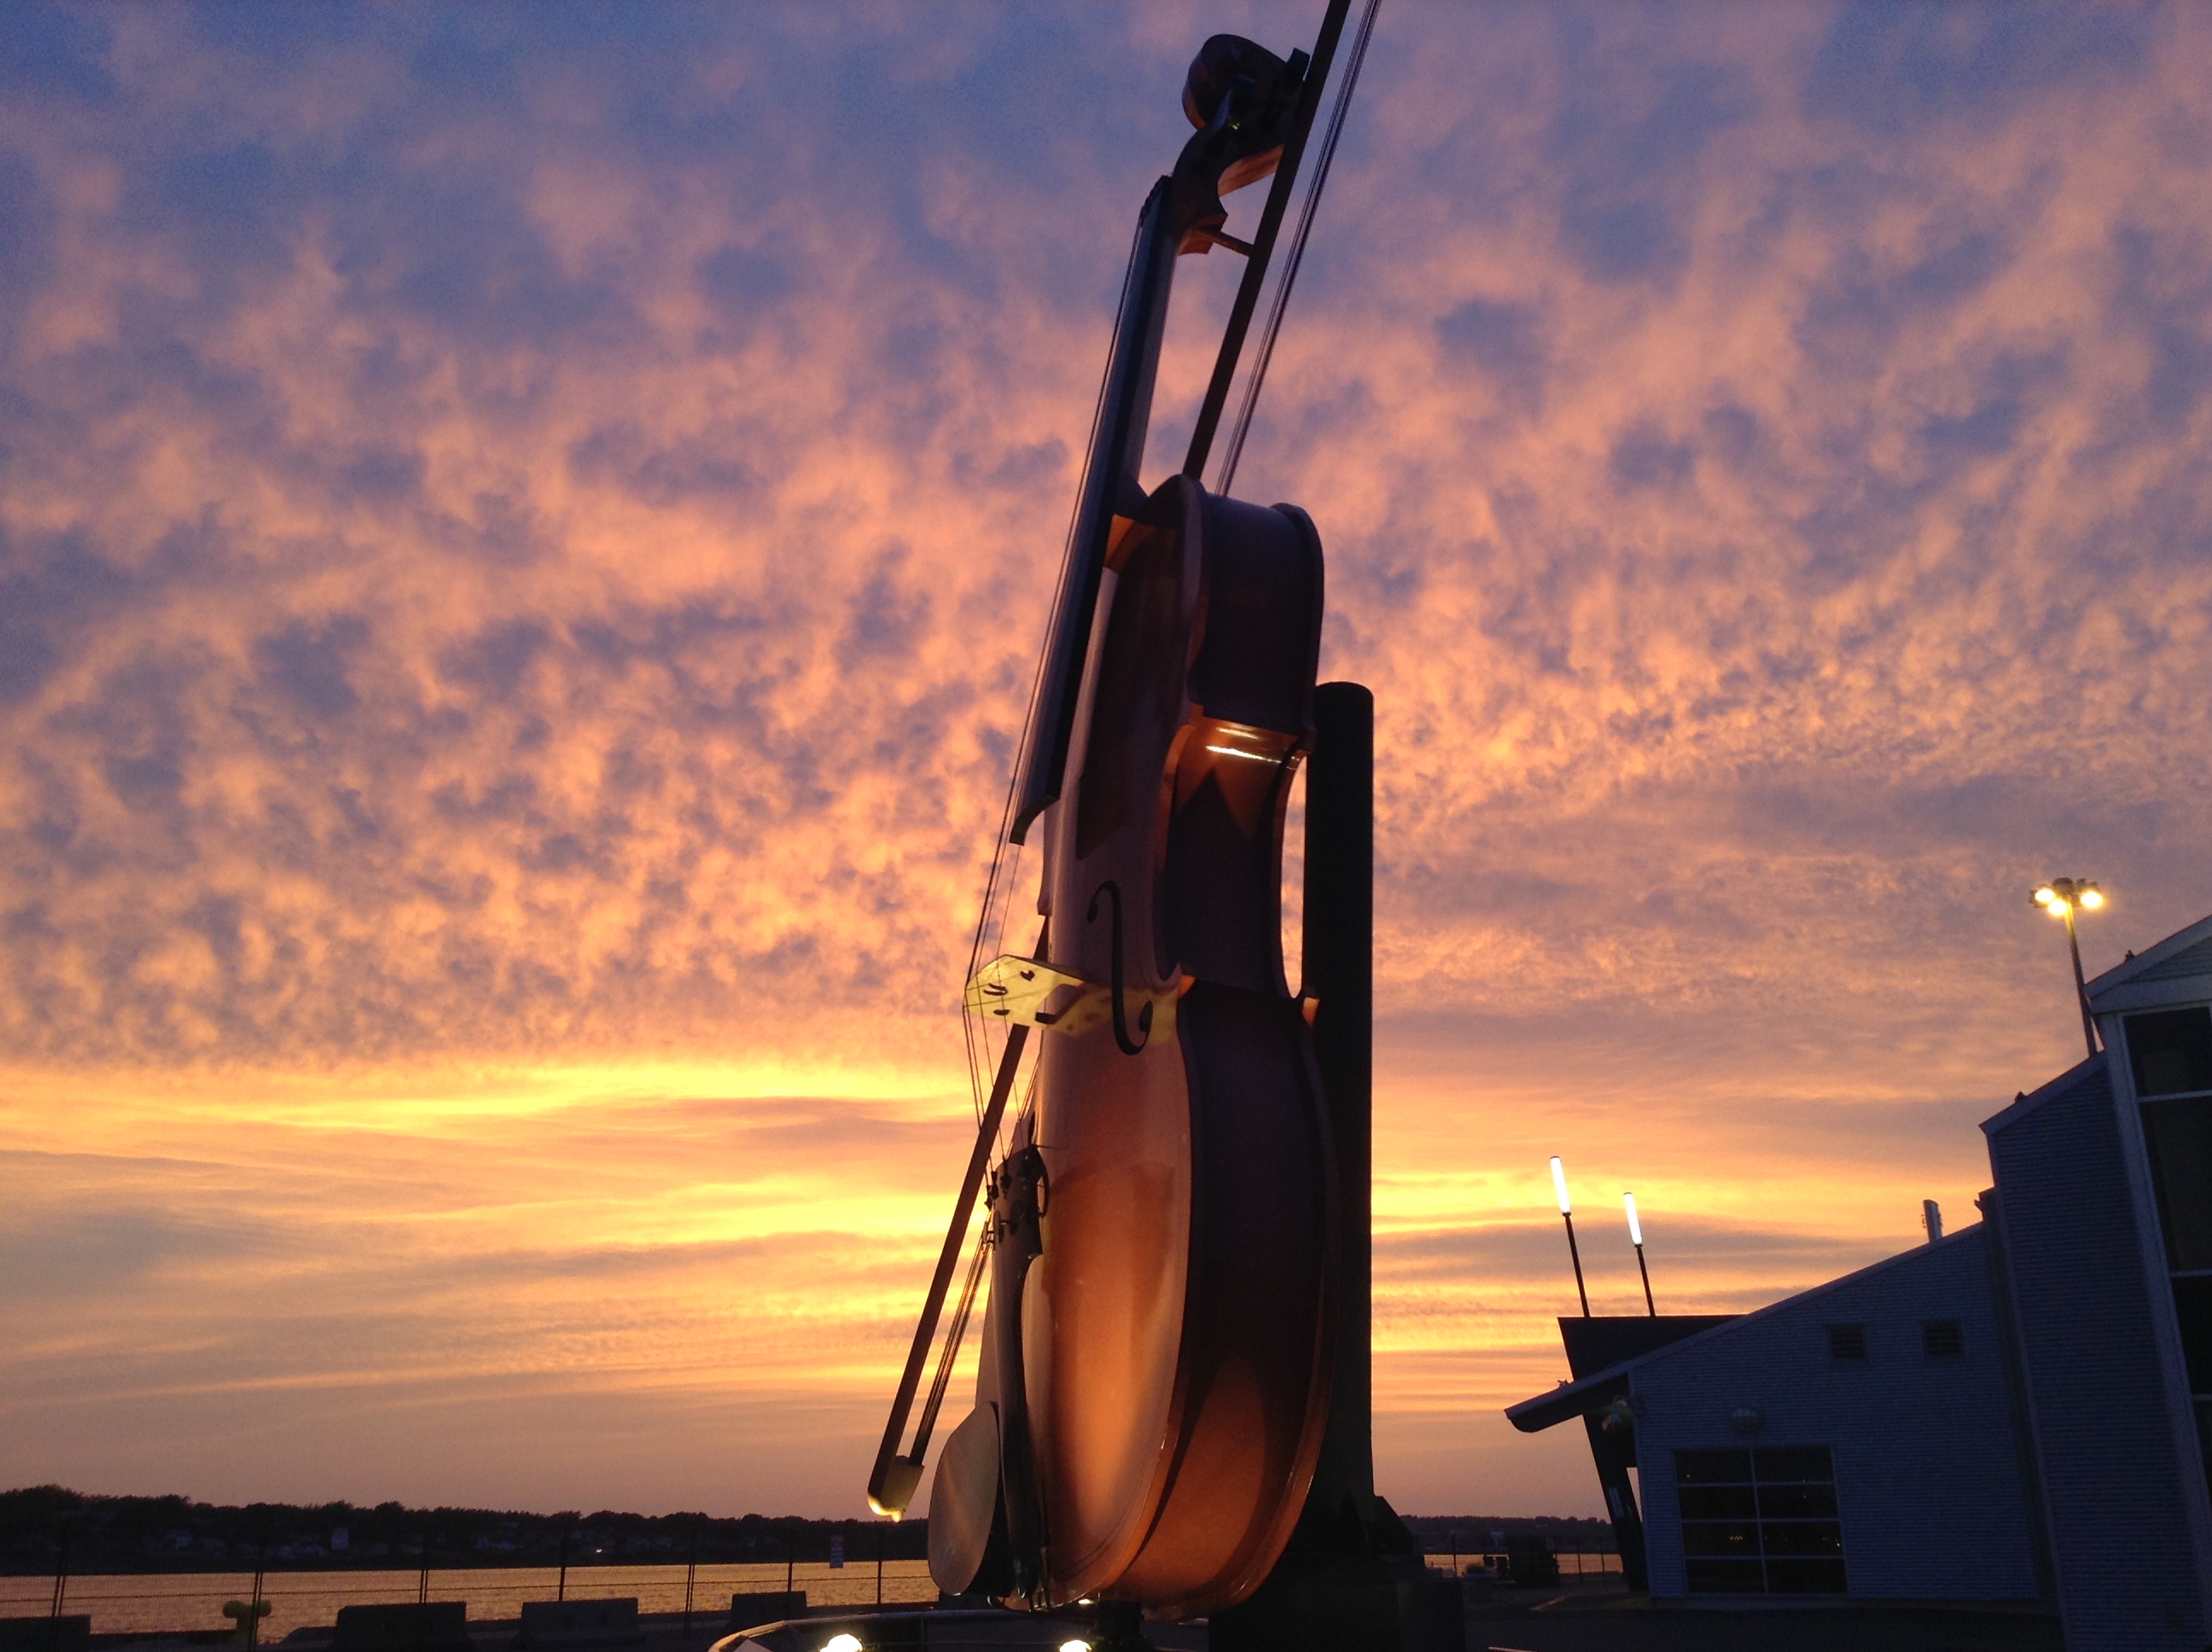 Big Fiddle during on Tuesday Evening and the Clouds is Orange Looking